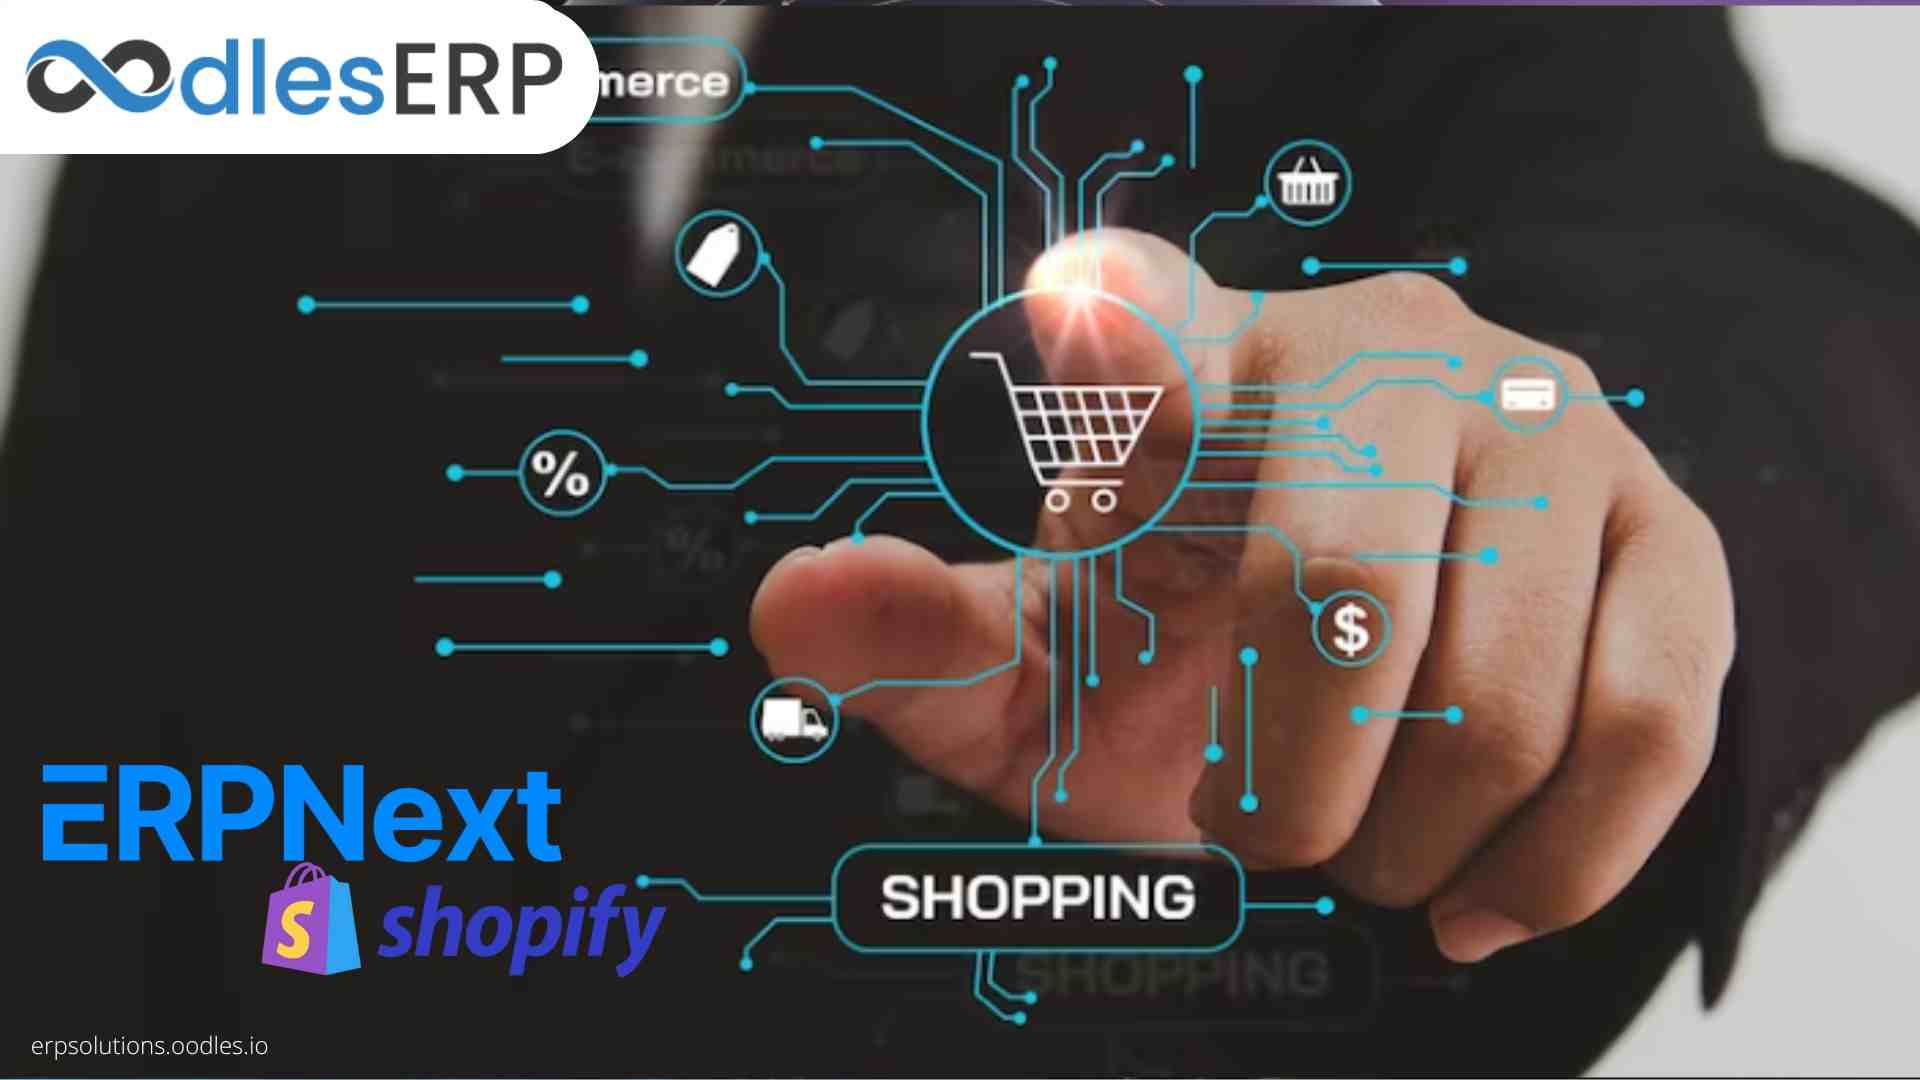 ERPNext Integration With Shopify To Enhance eCommerce Productivity